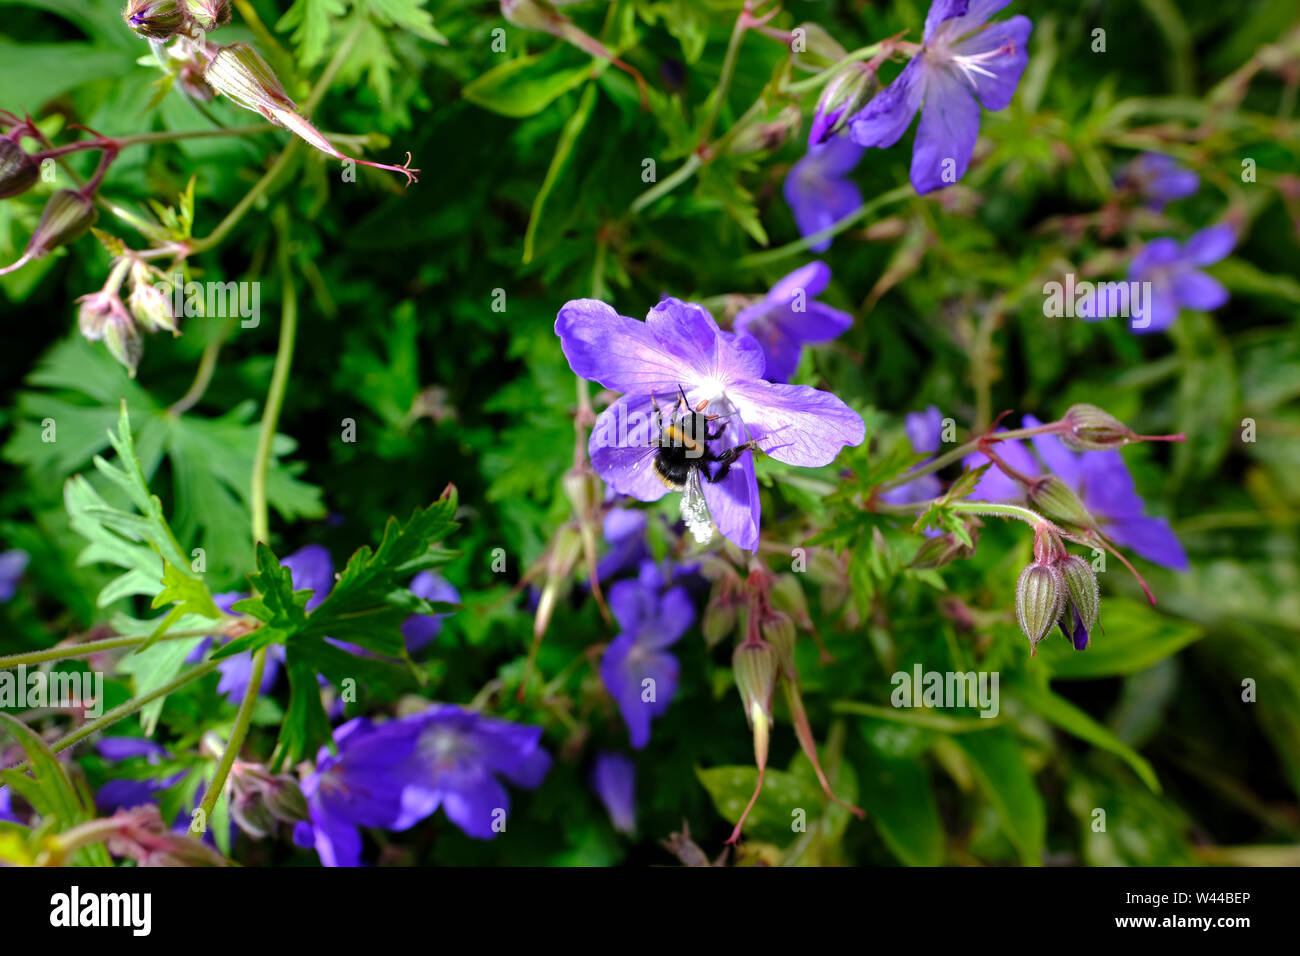 Geranium flowers being pollinated by a bumble bee in an English cottage garden herbaceous border Stock Photo